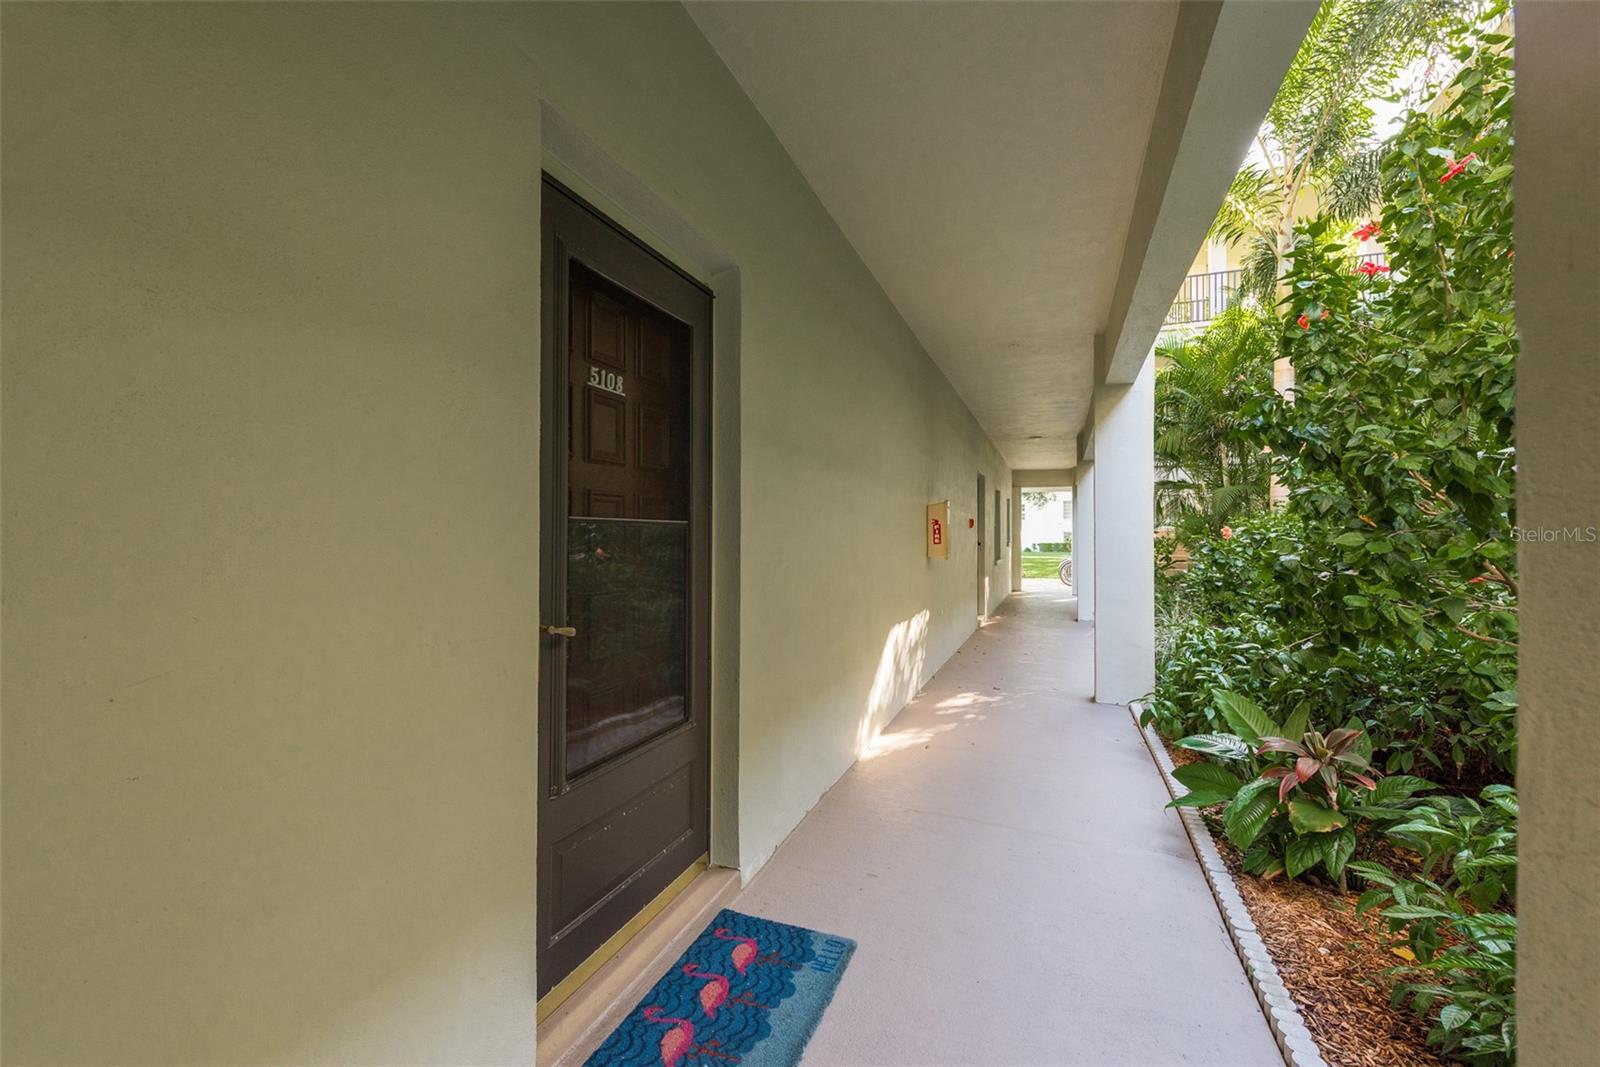 A true tropical oasis at your front door